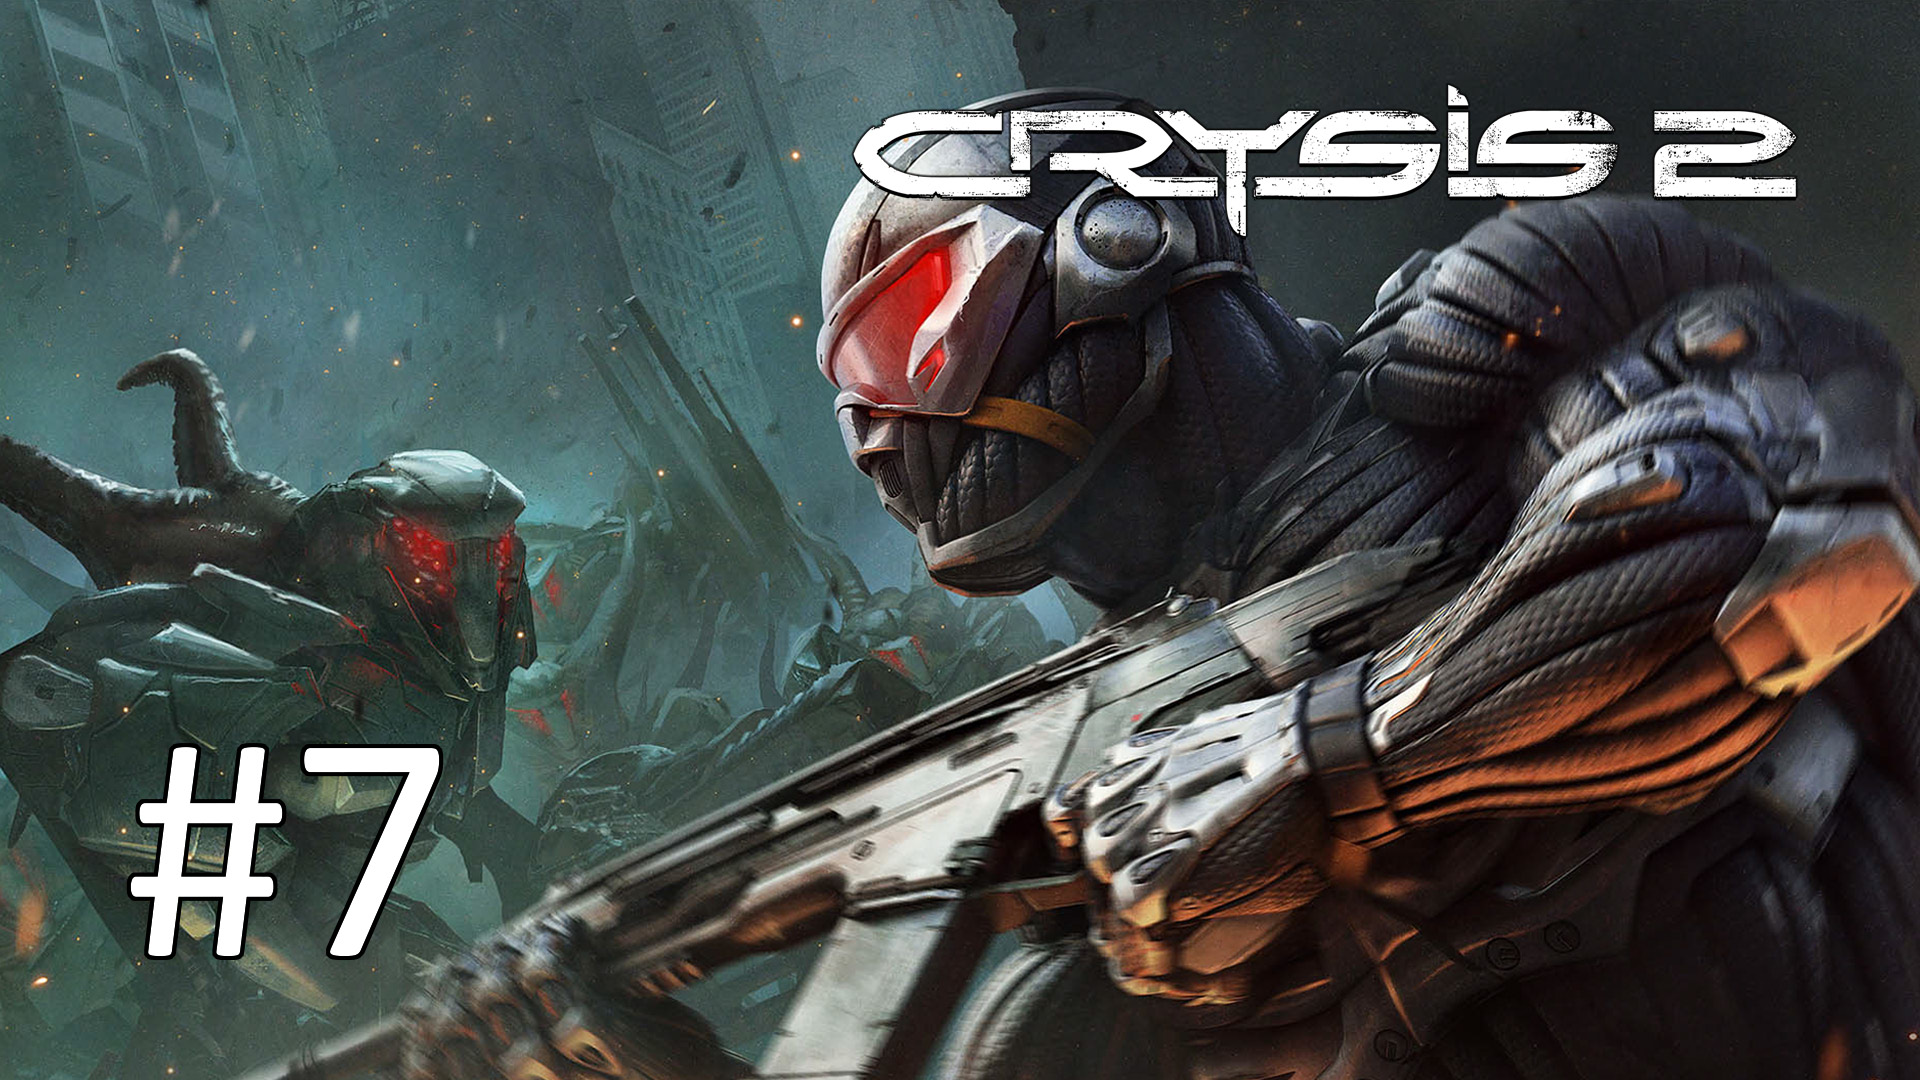 Crysis trainer